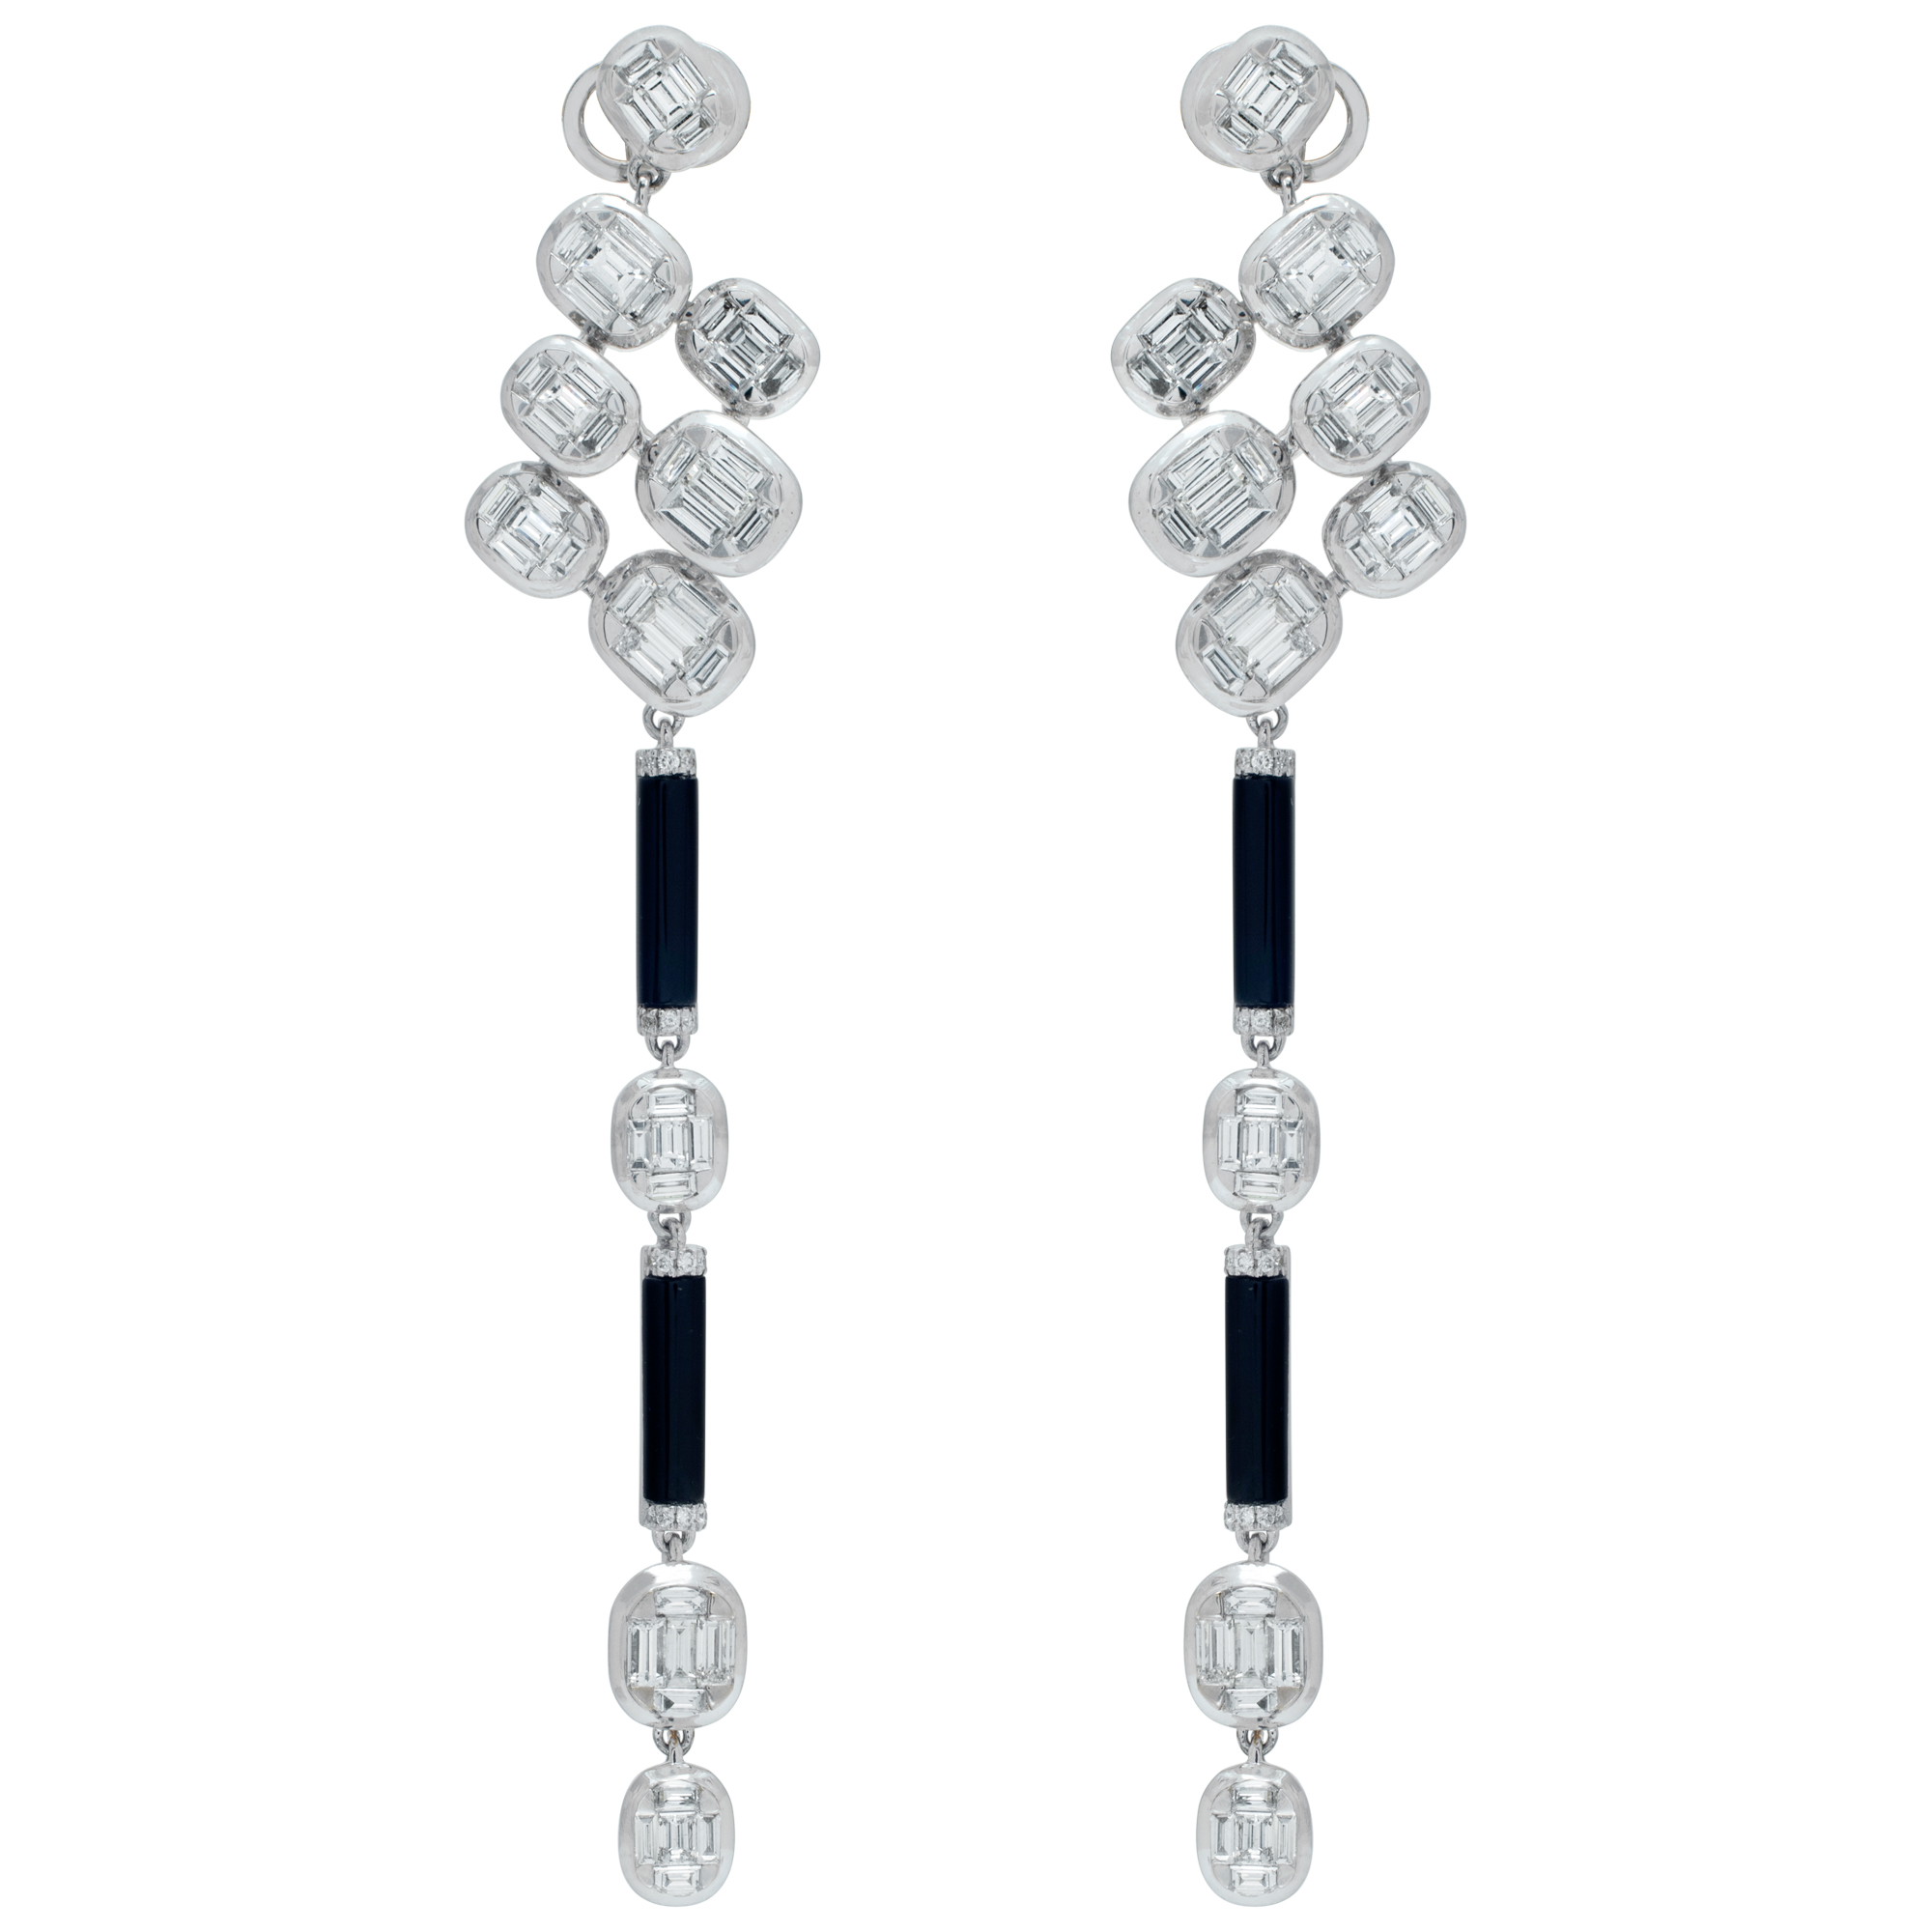 Baguettes, round brilliant diamonds and onyx hanging earrings in 18k white gold. Baguettes and round brilliant diamonds total approx. weight: 3.77 carats (Stones)